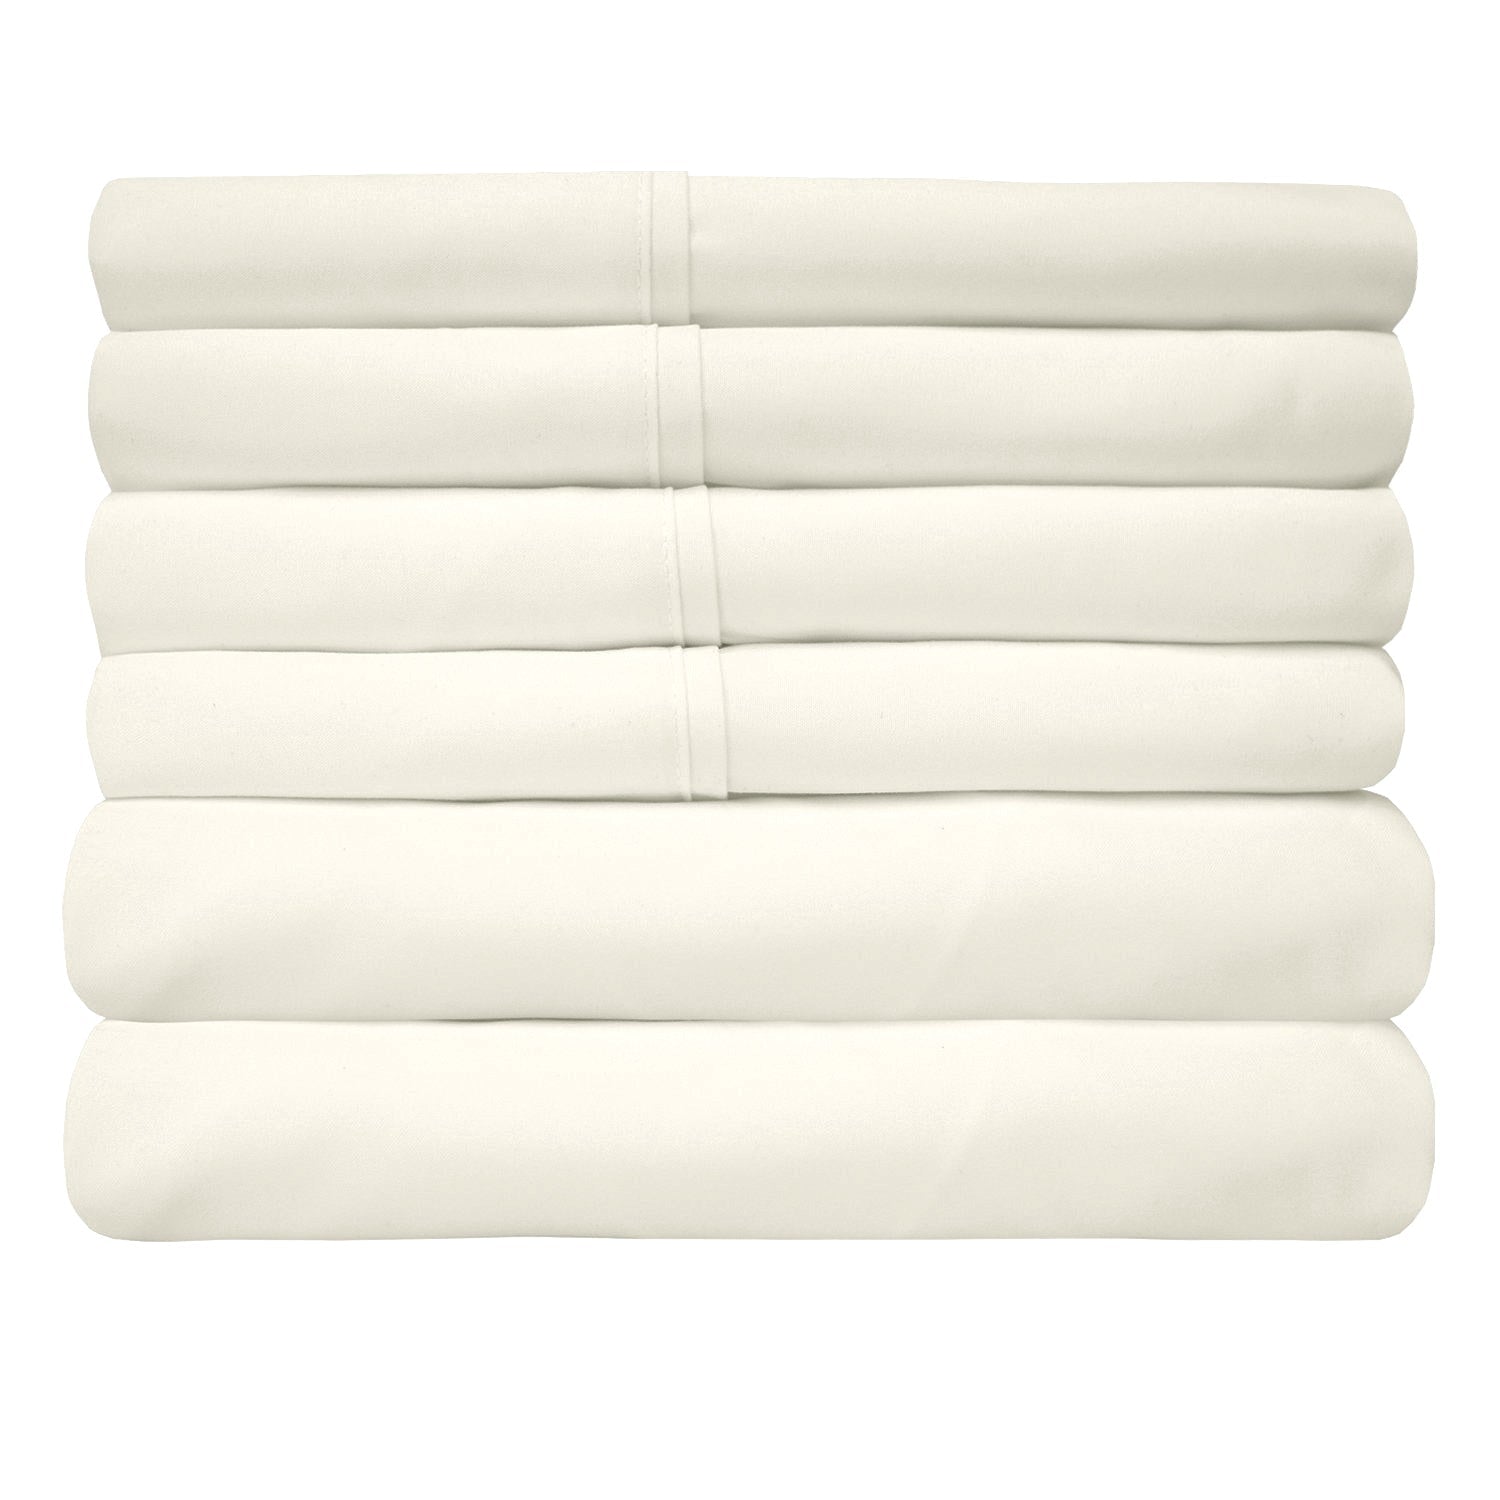 Deluxe 6-Piece Bed Sheet Set (Ivory) - Folded 2